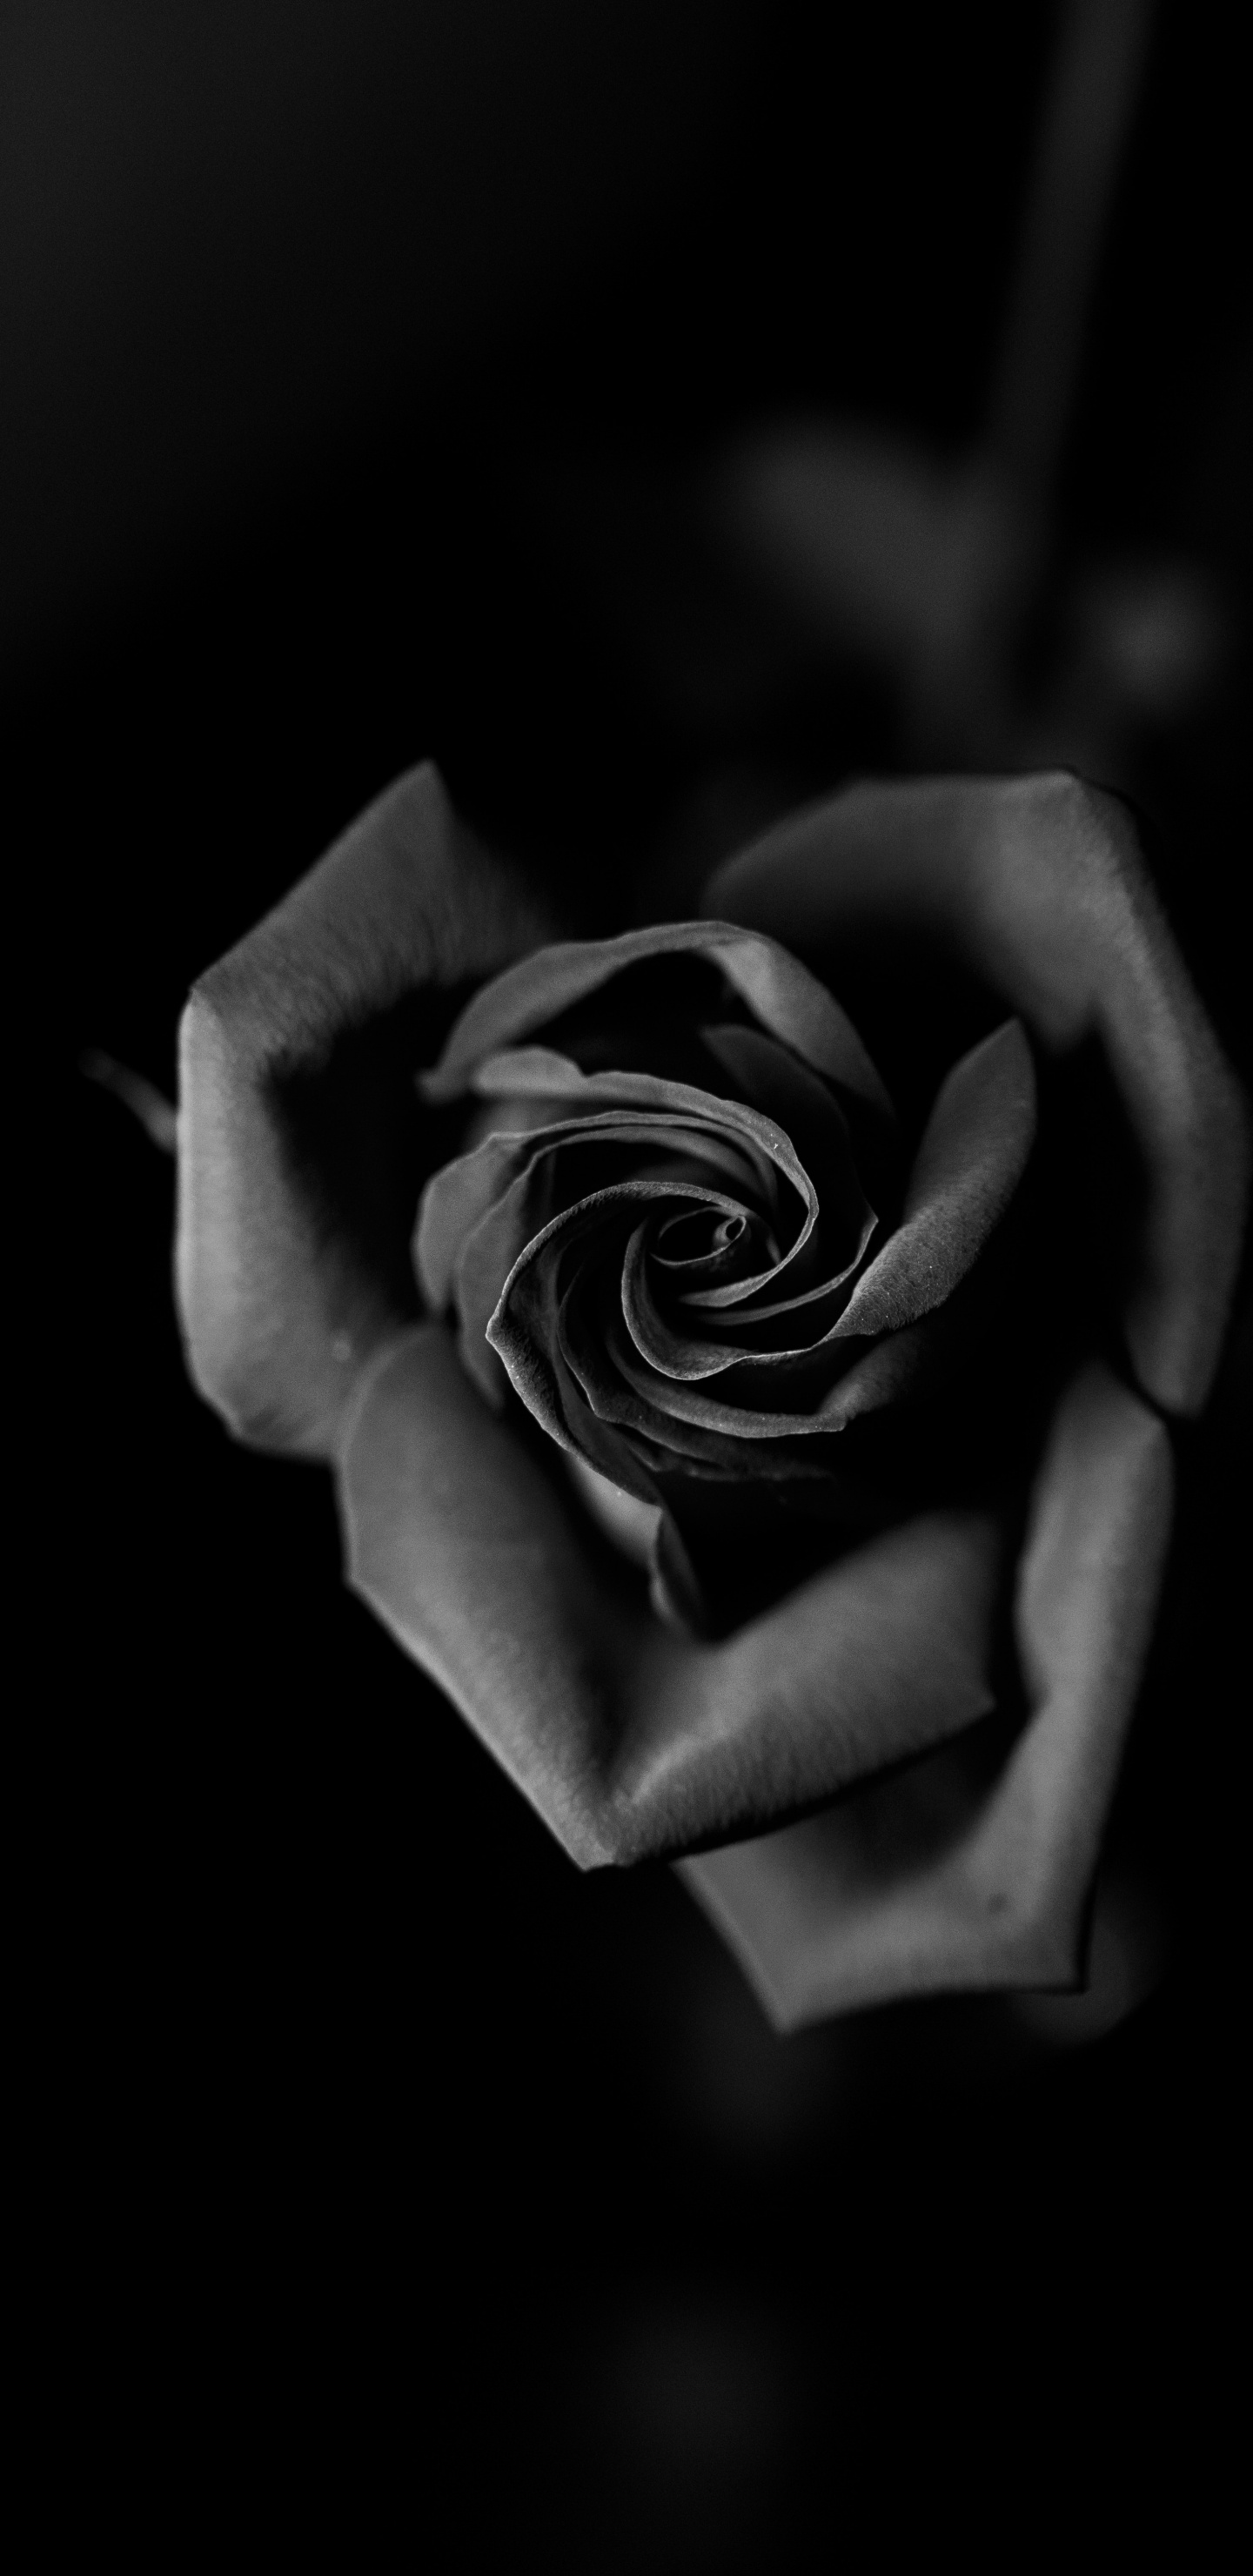 Grayscale Photo of Rose Flower. Wallpaper in 1440x2960 Resolution